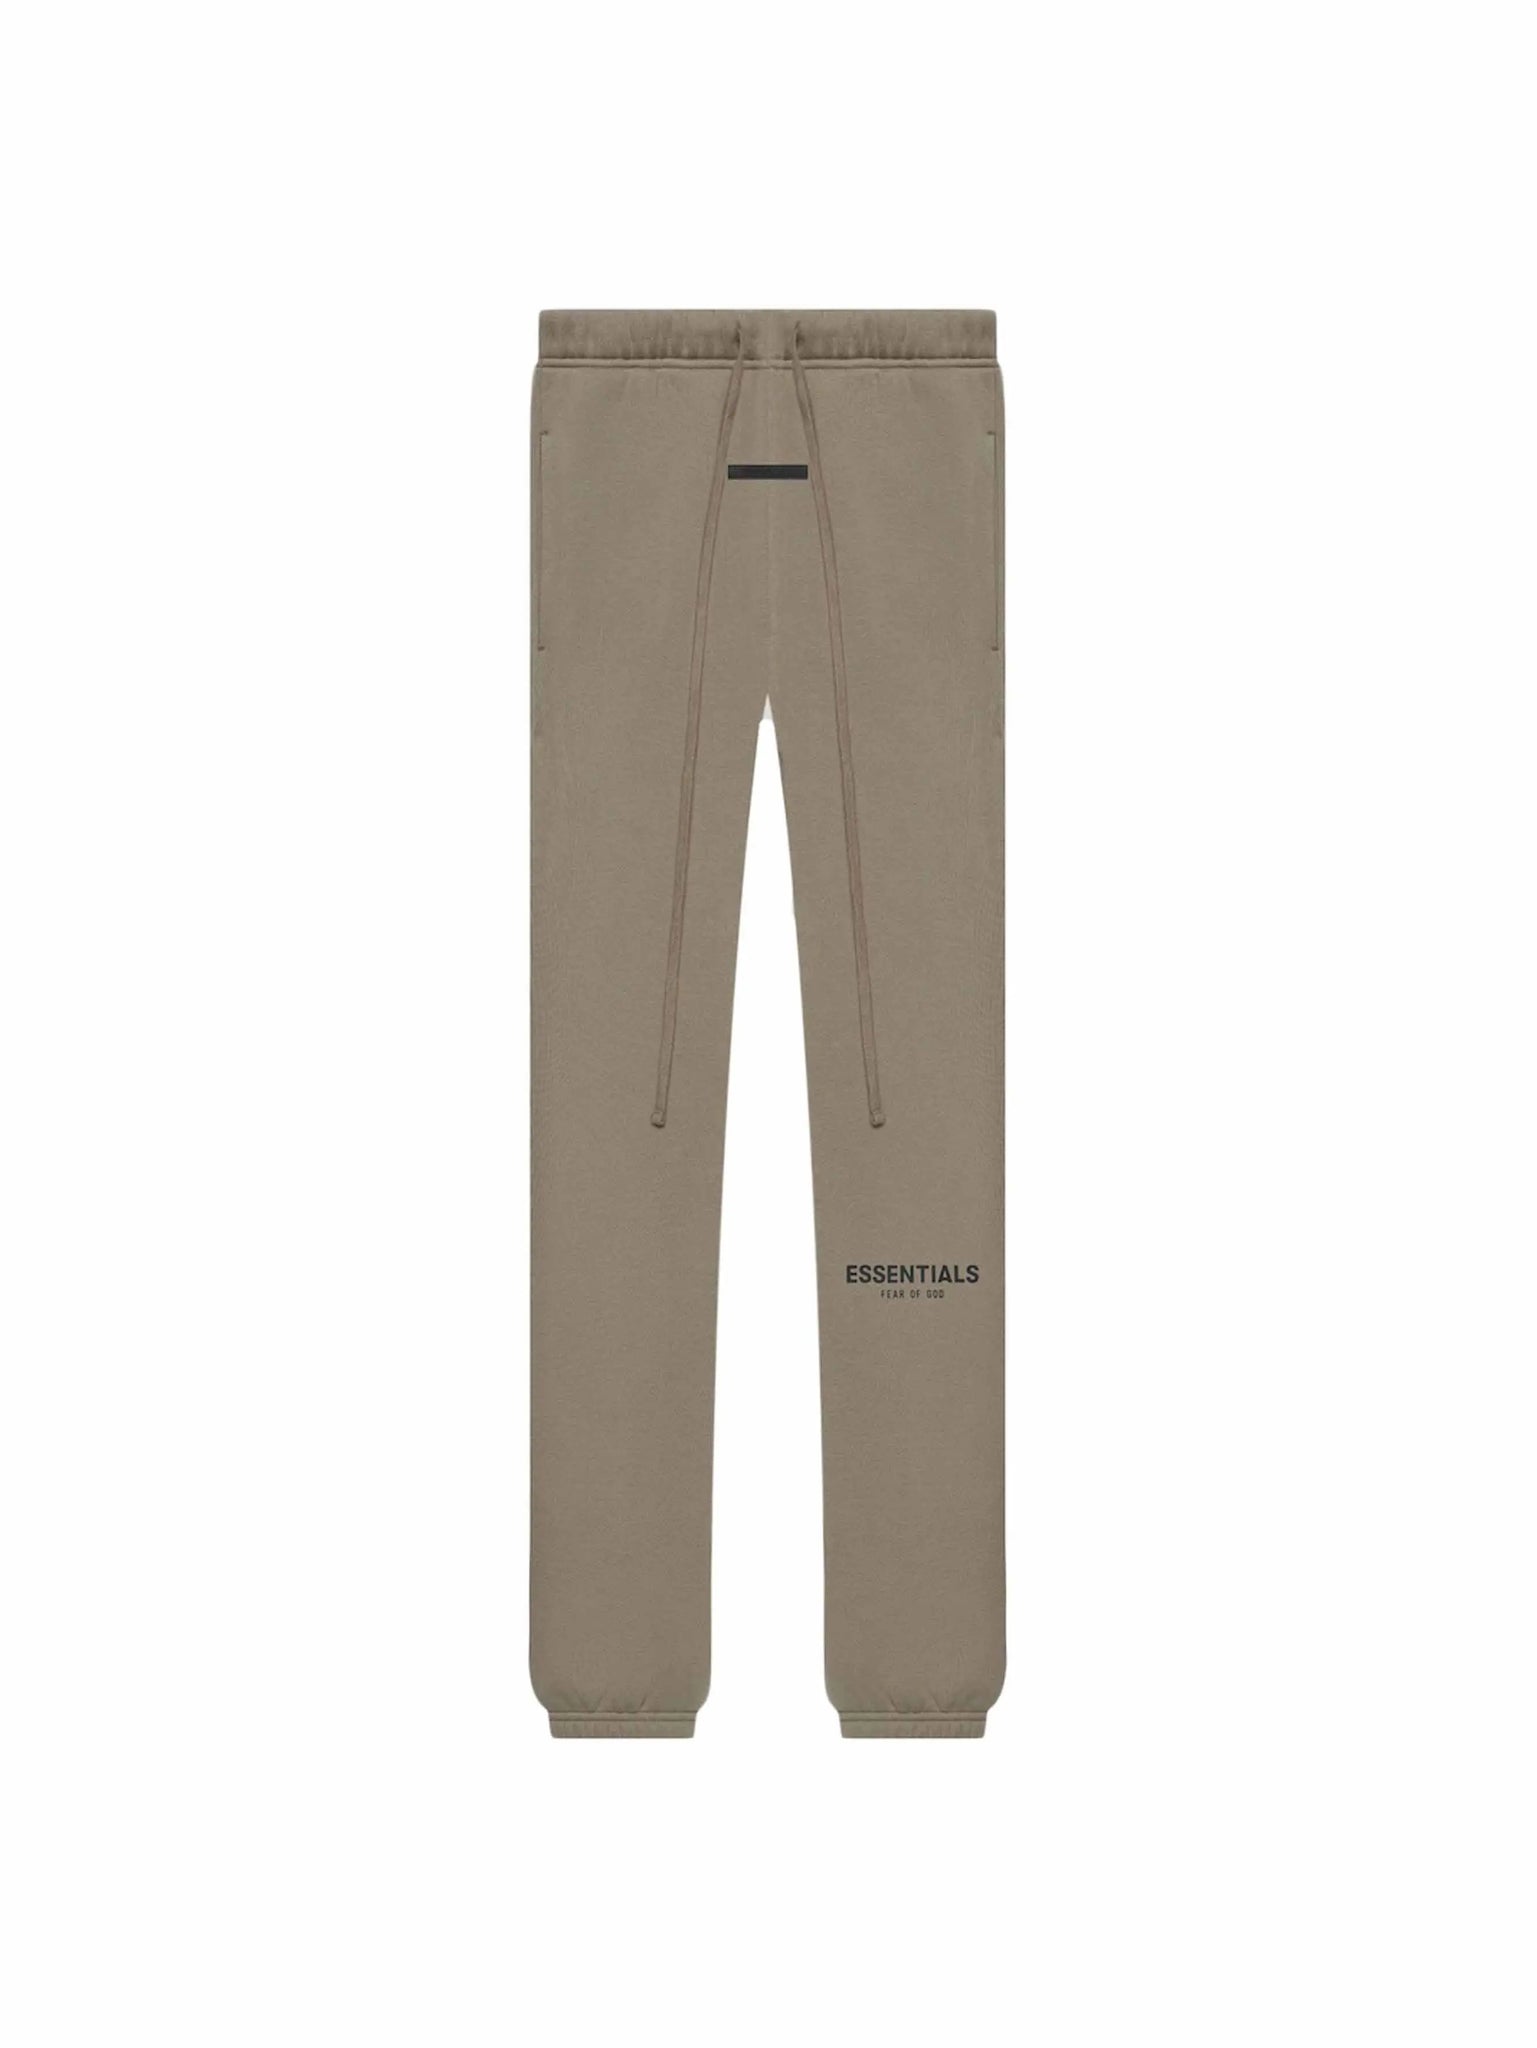 Fear of God Essentials Sweatpants (SS21) Taupe - Prior